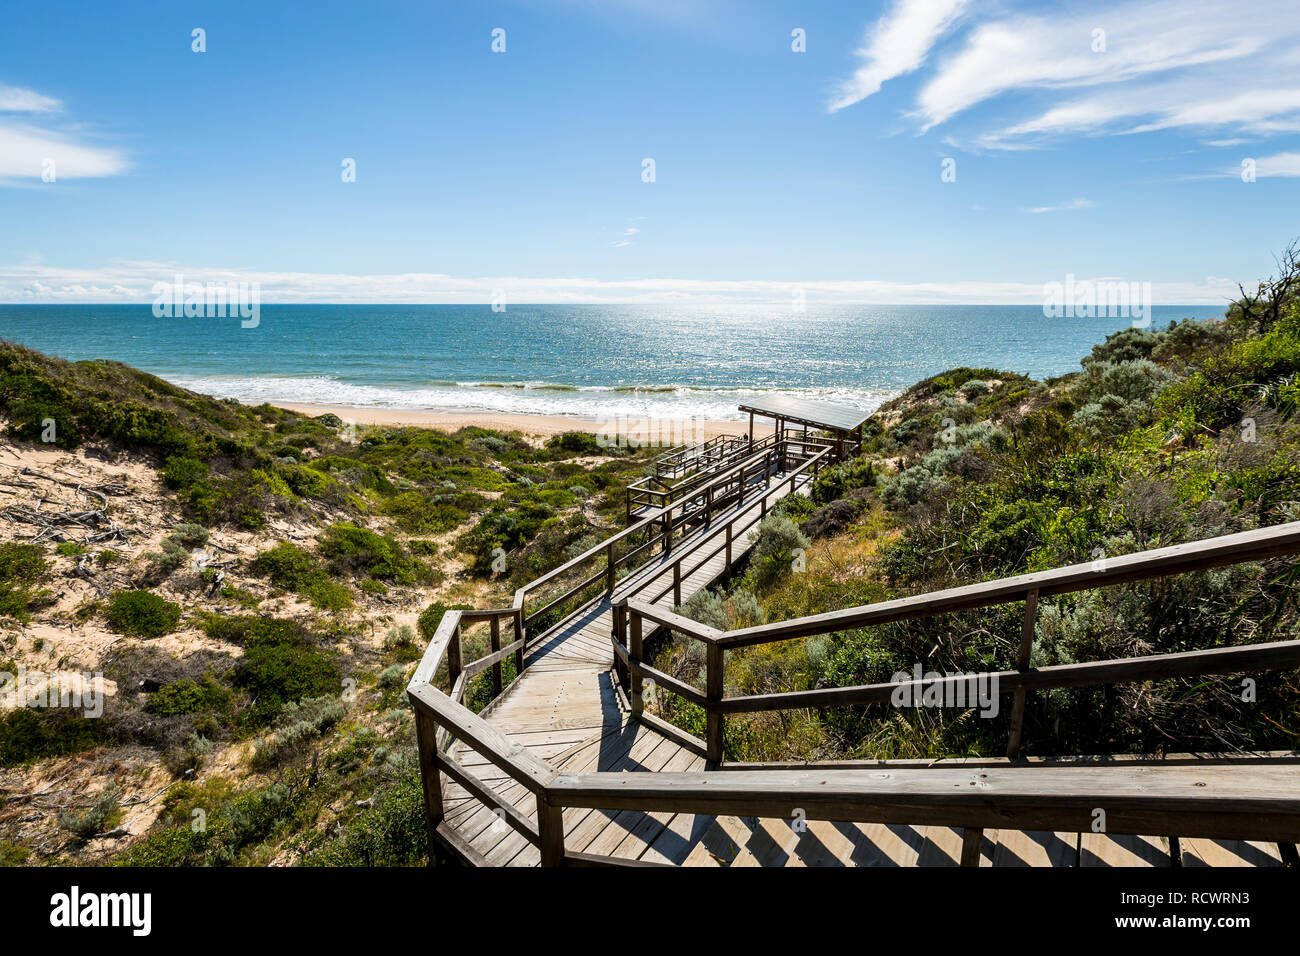 Beautiful bright spring day view towards beach over looking wooden walk way Dalyllup Western Australia Stock Photo